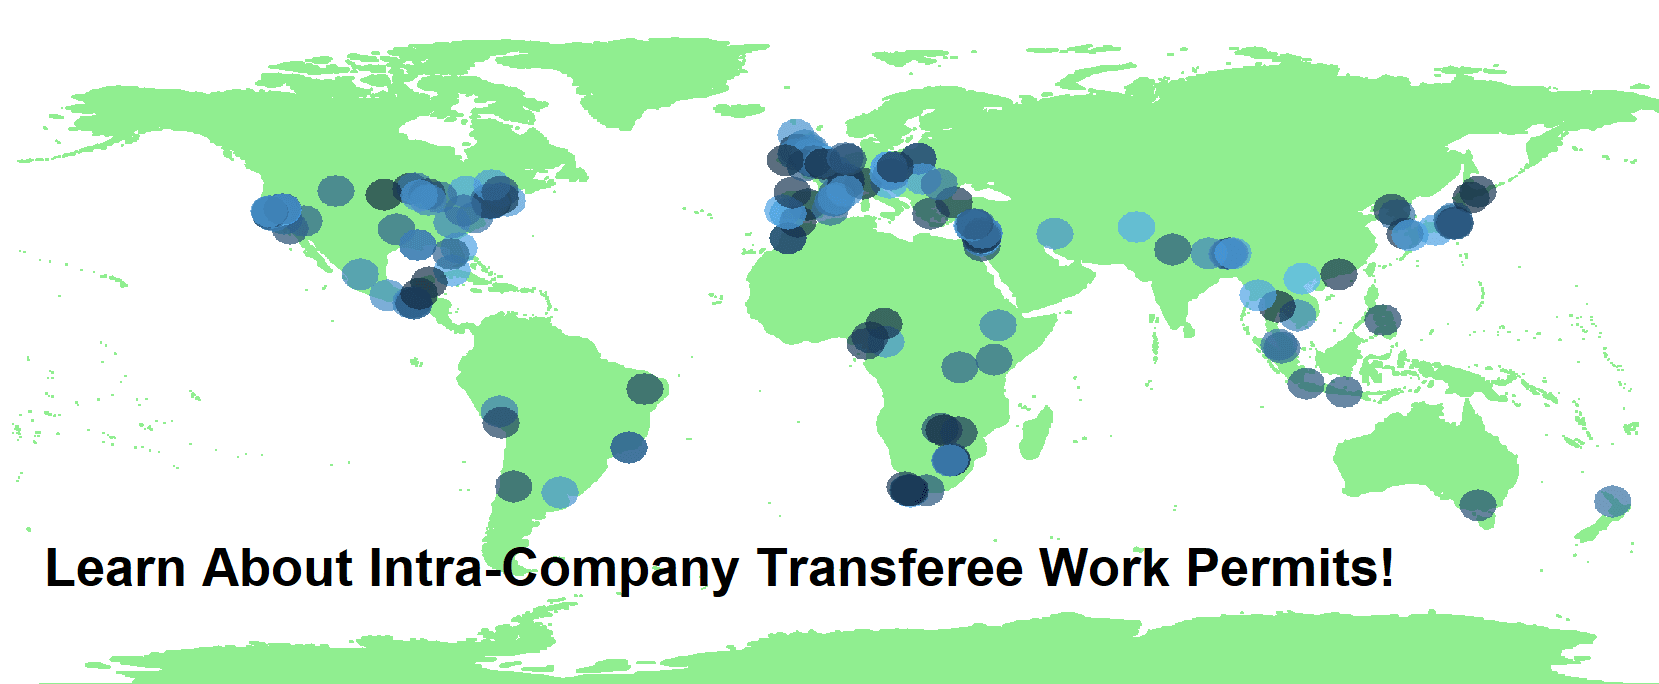 about-intra-company-transferee-work-permit_20180604-092738_1.png